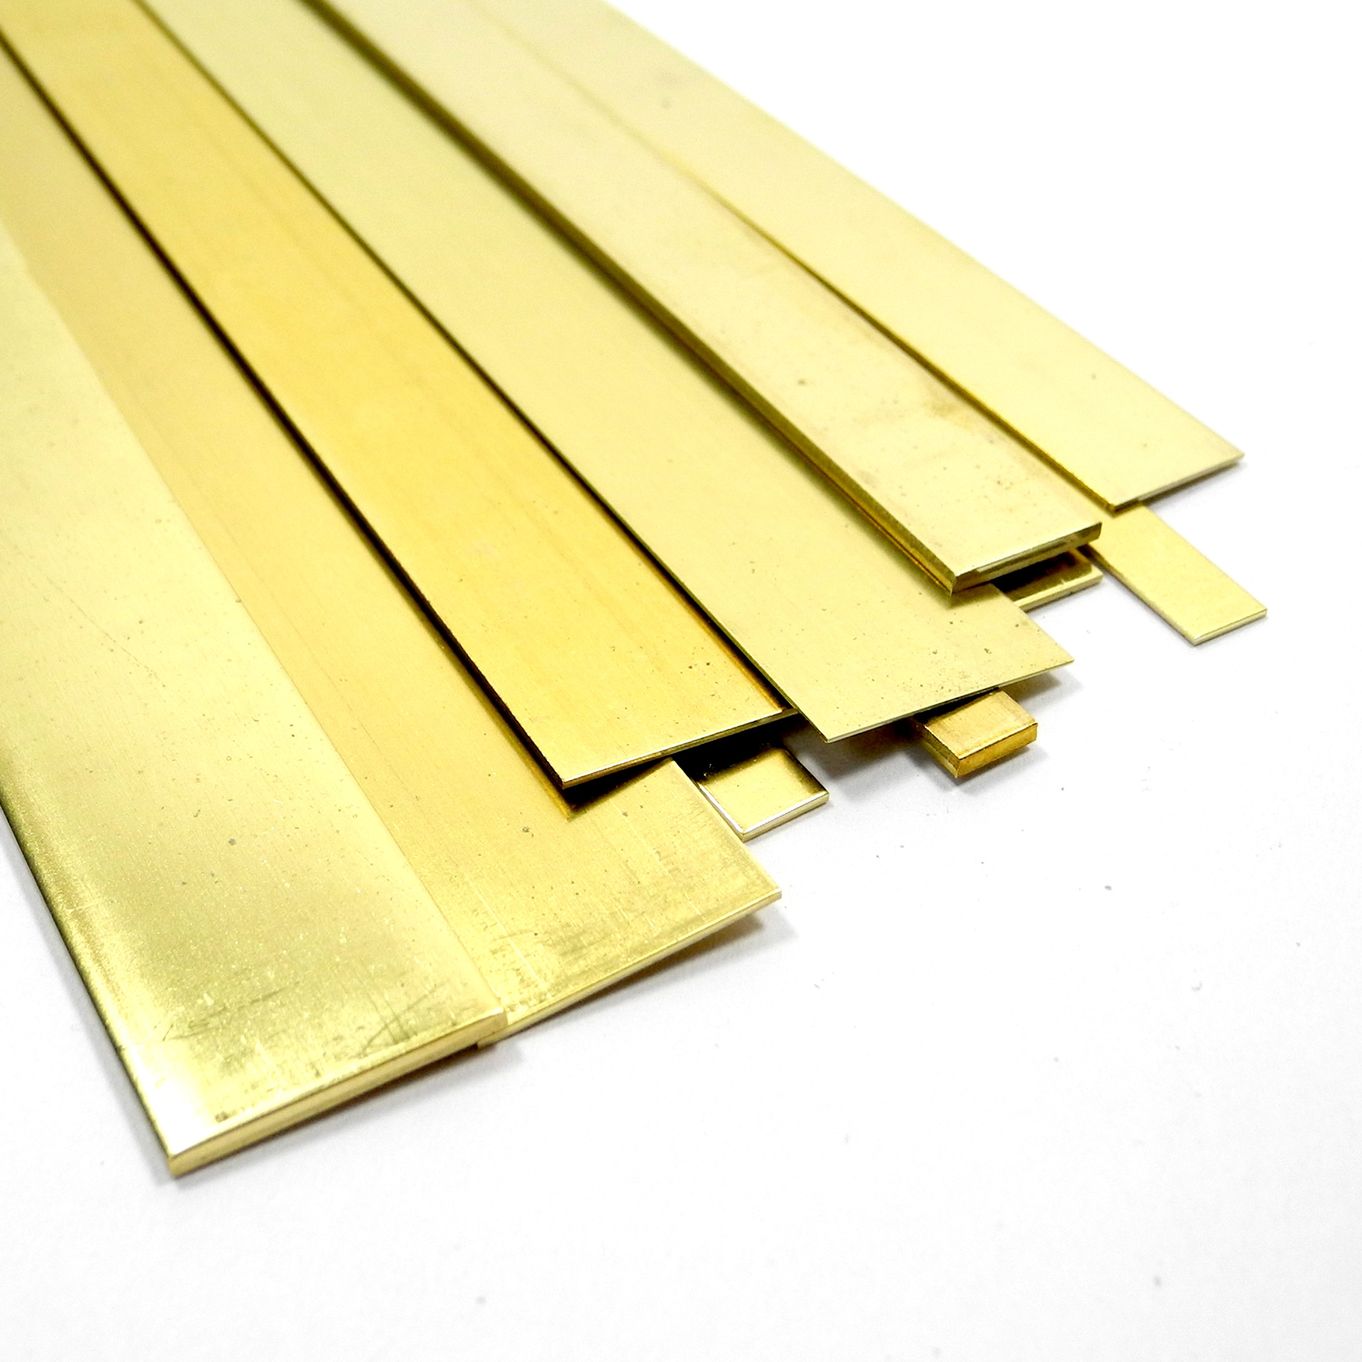  K & S 9715 Brass Strip, 0.016 Thick x 1 Wide x 36 Long, 5  Pieces, Made in The USA : Industrial & Scientific